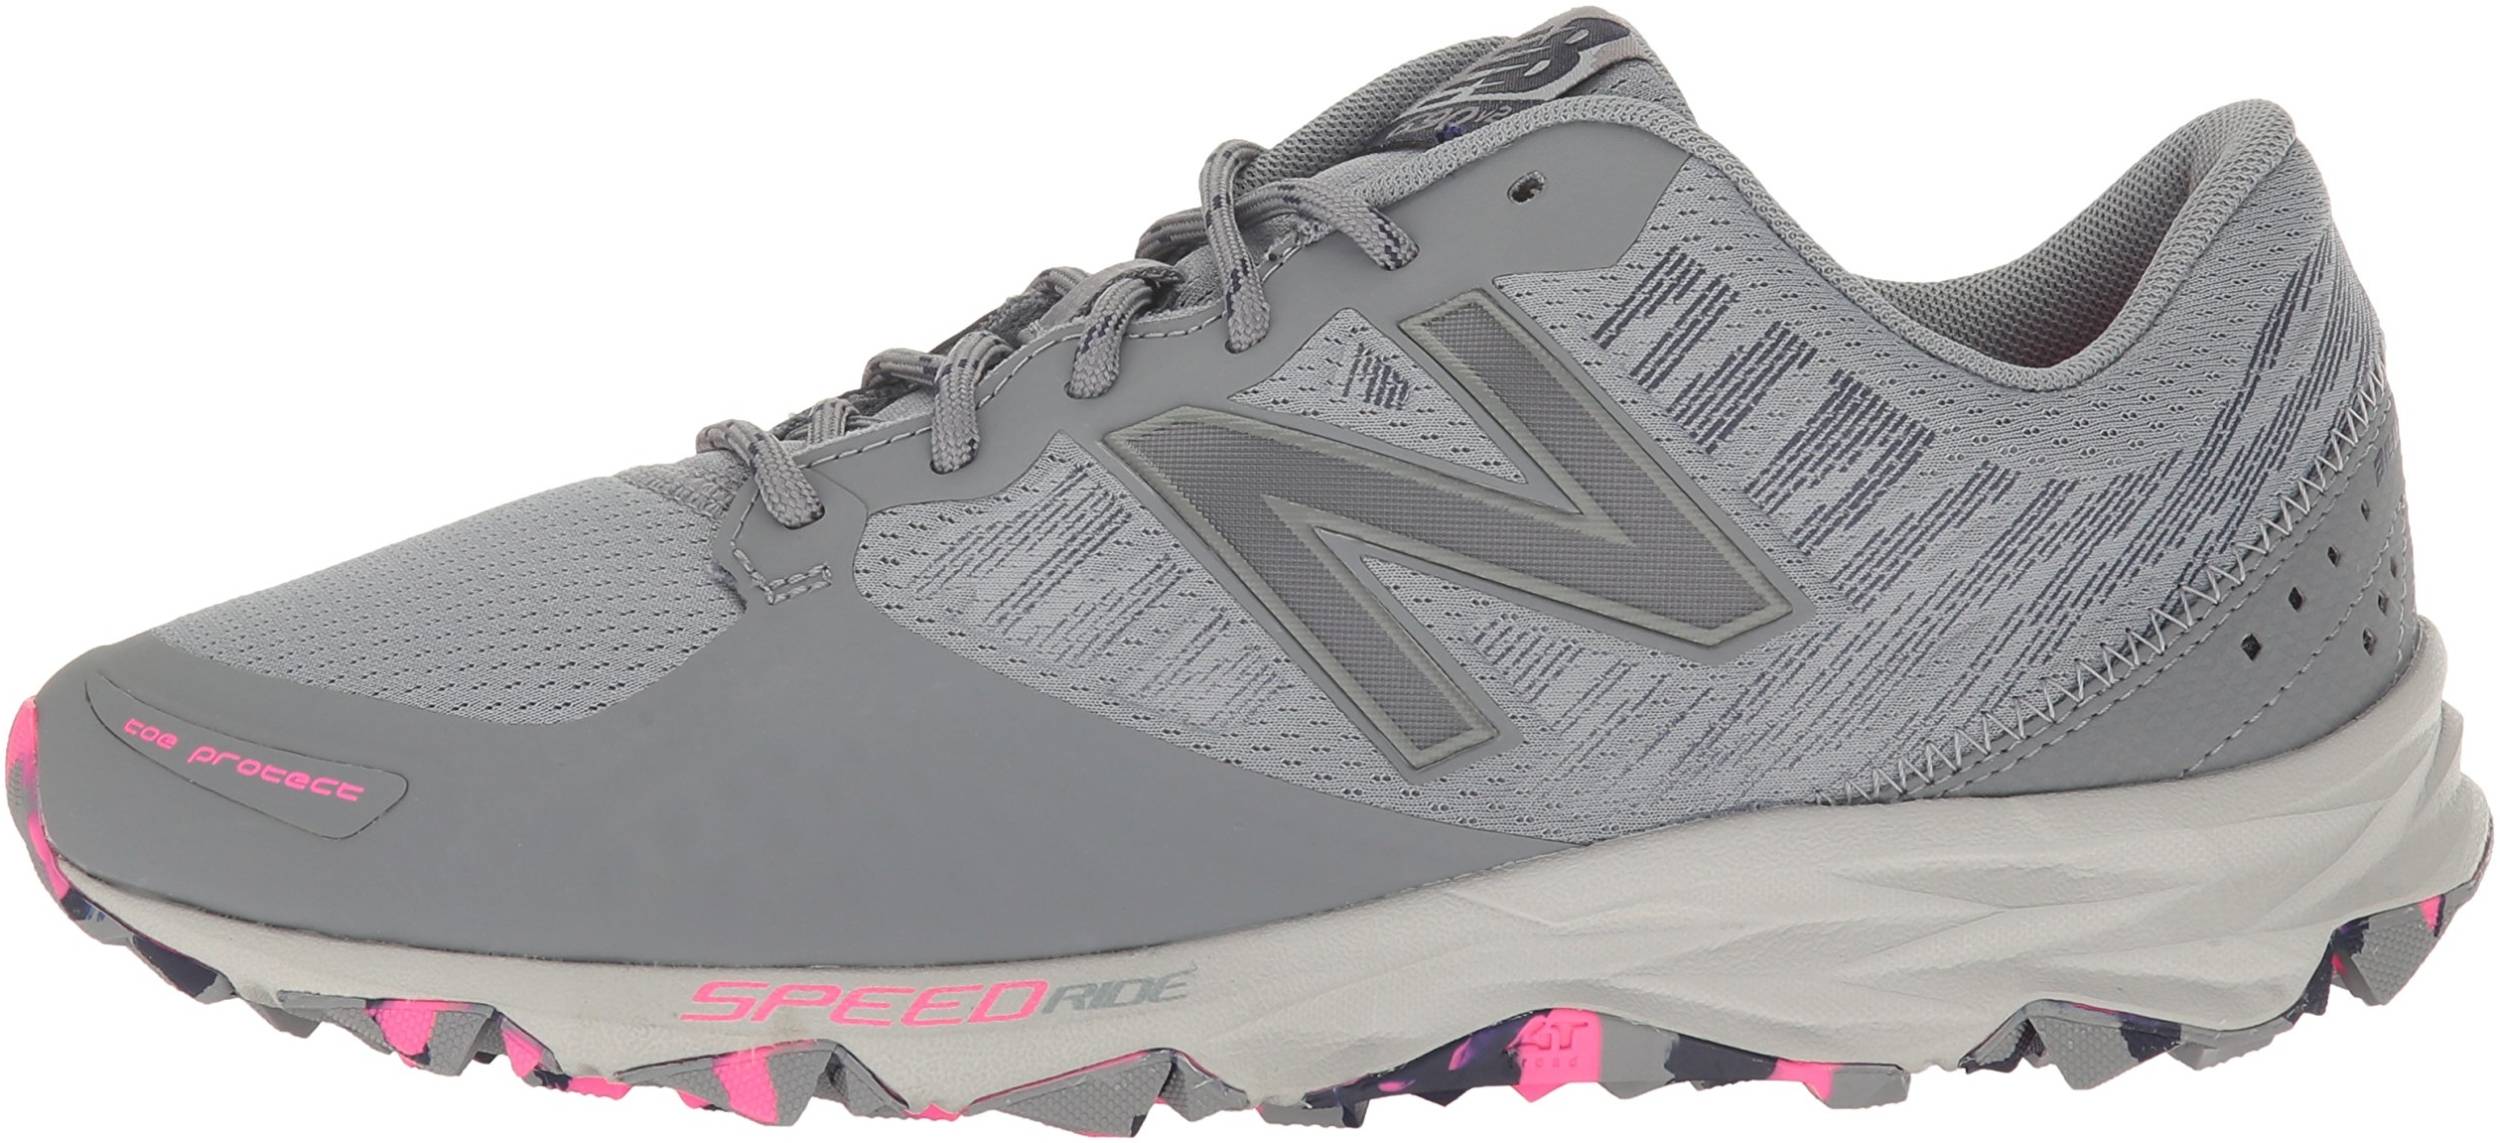 new balance 690 review